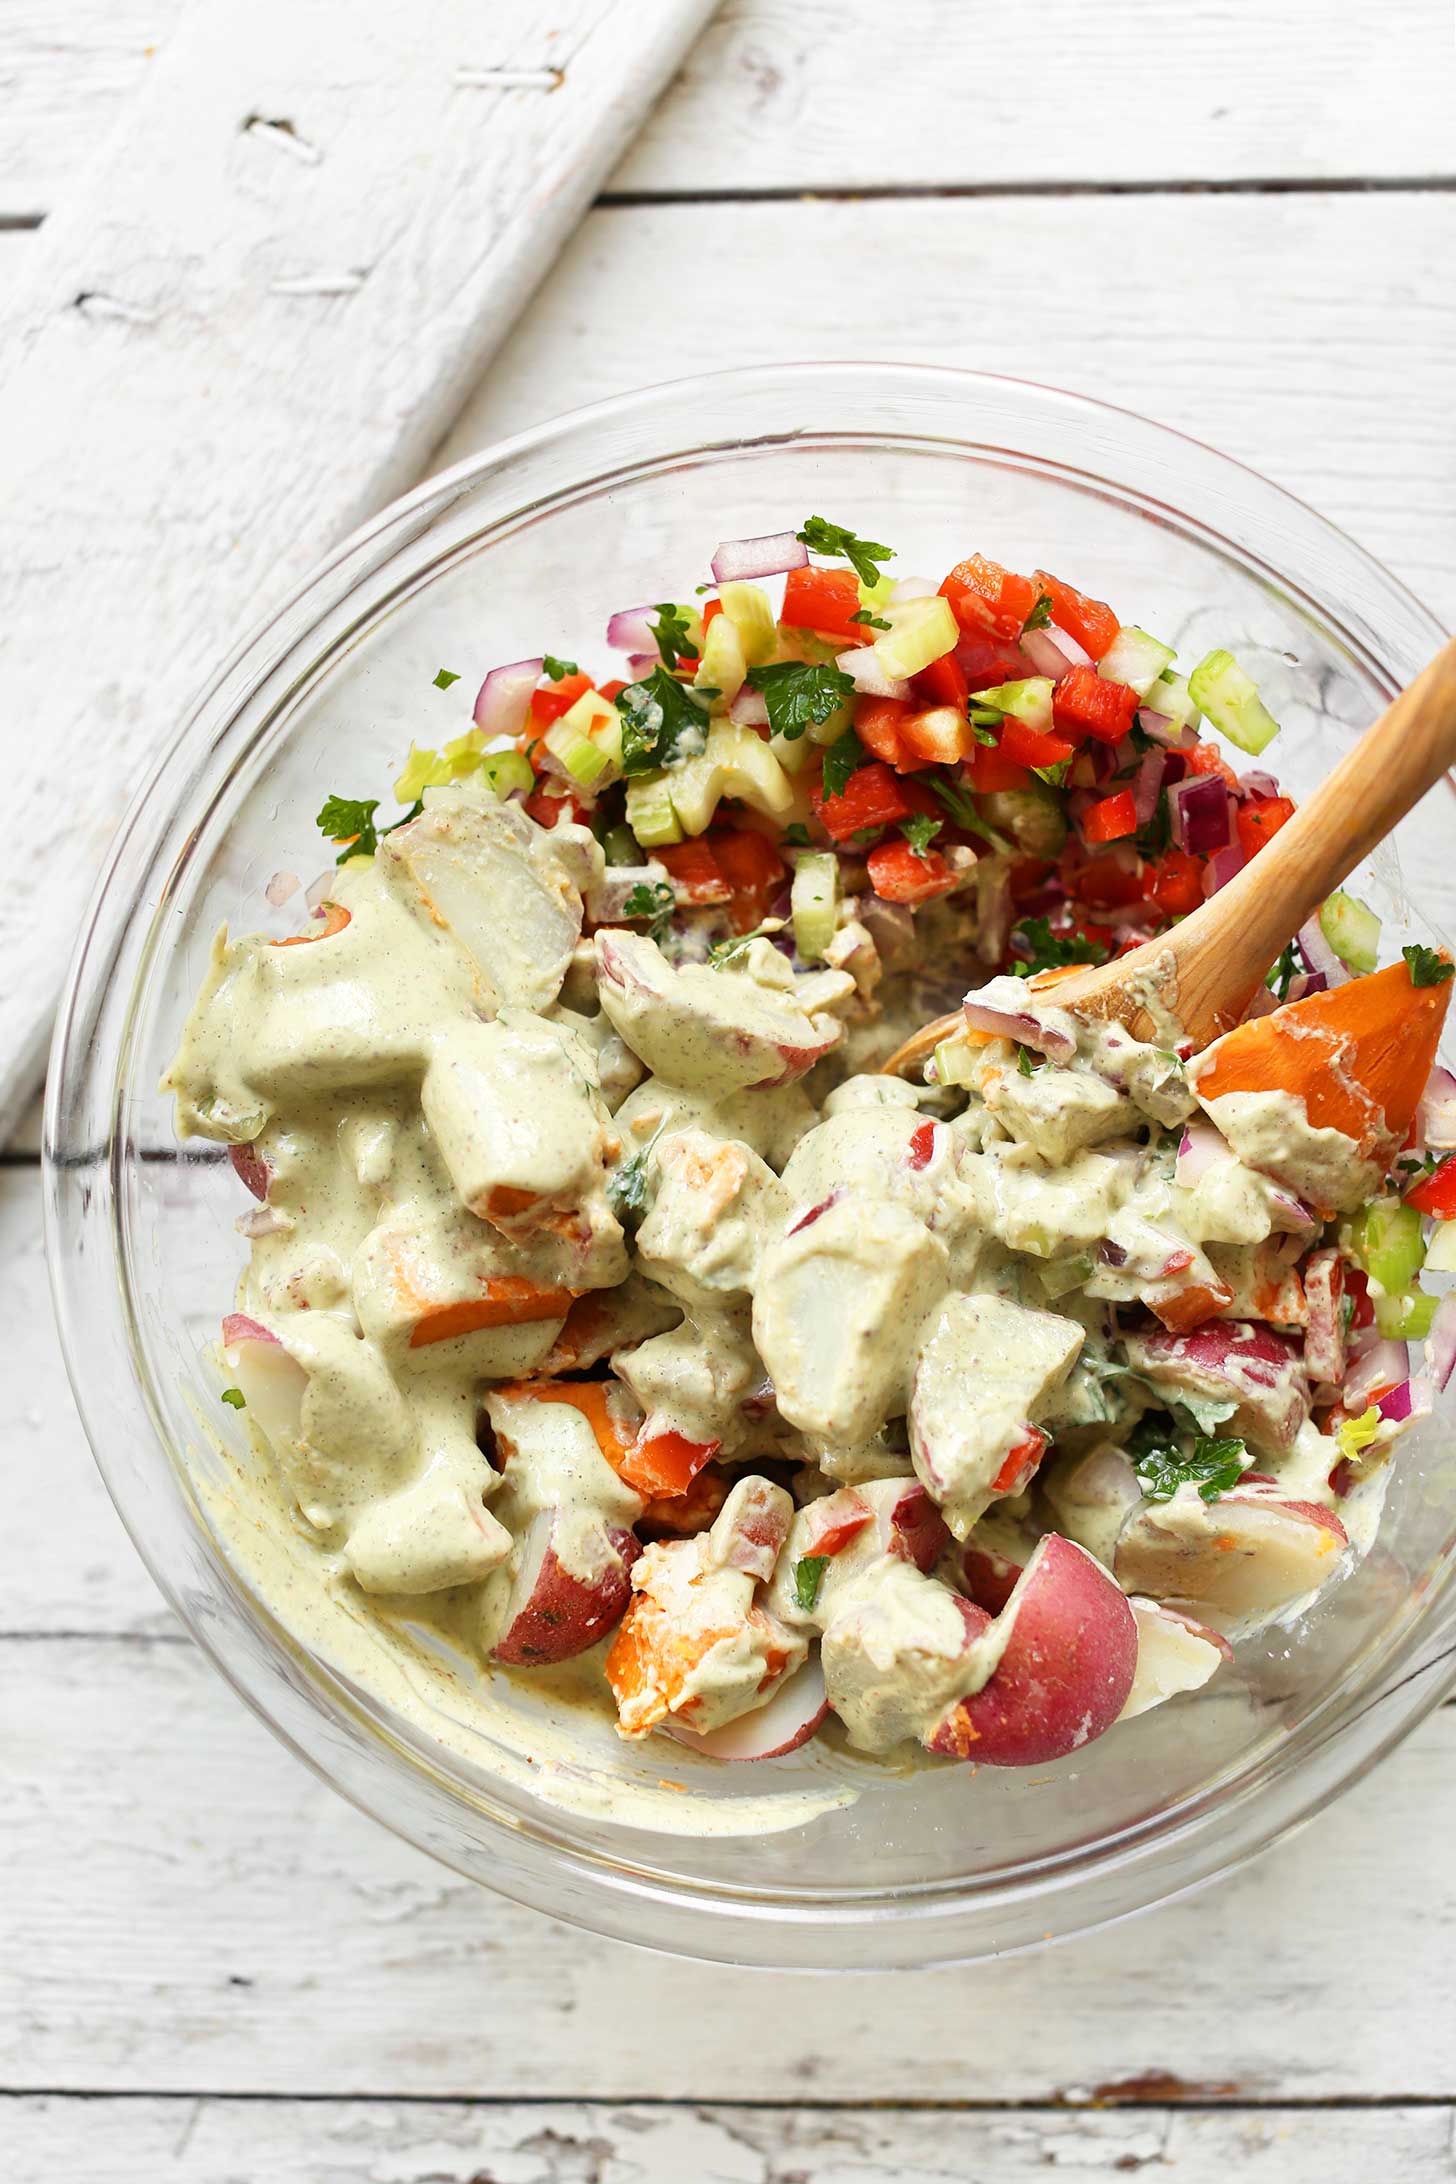 Stirring together ingredients for our healthy plant-based Potato Salad recipe